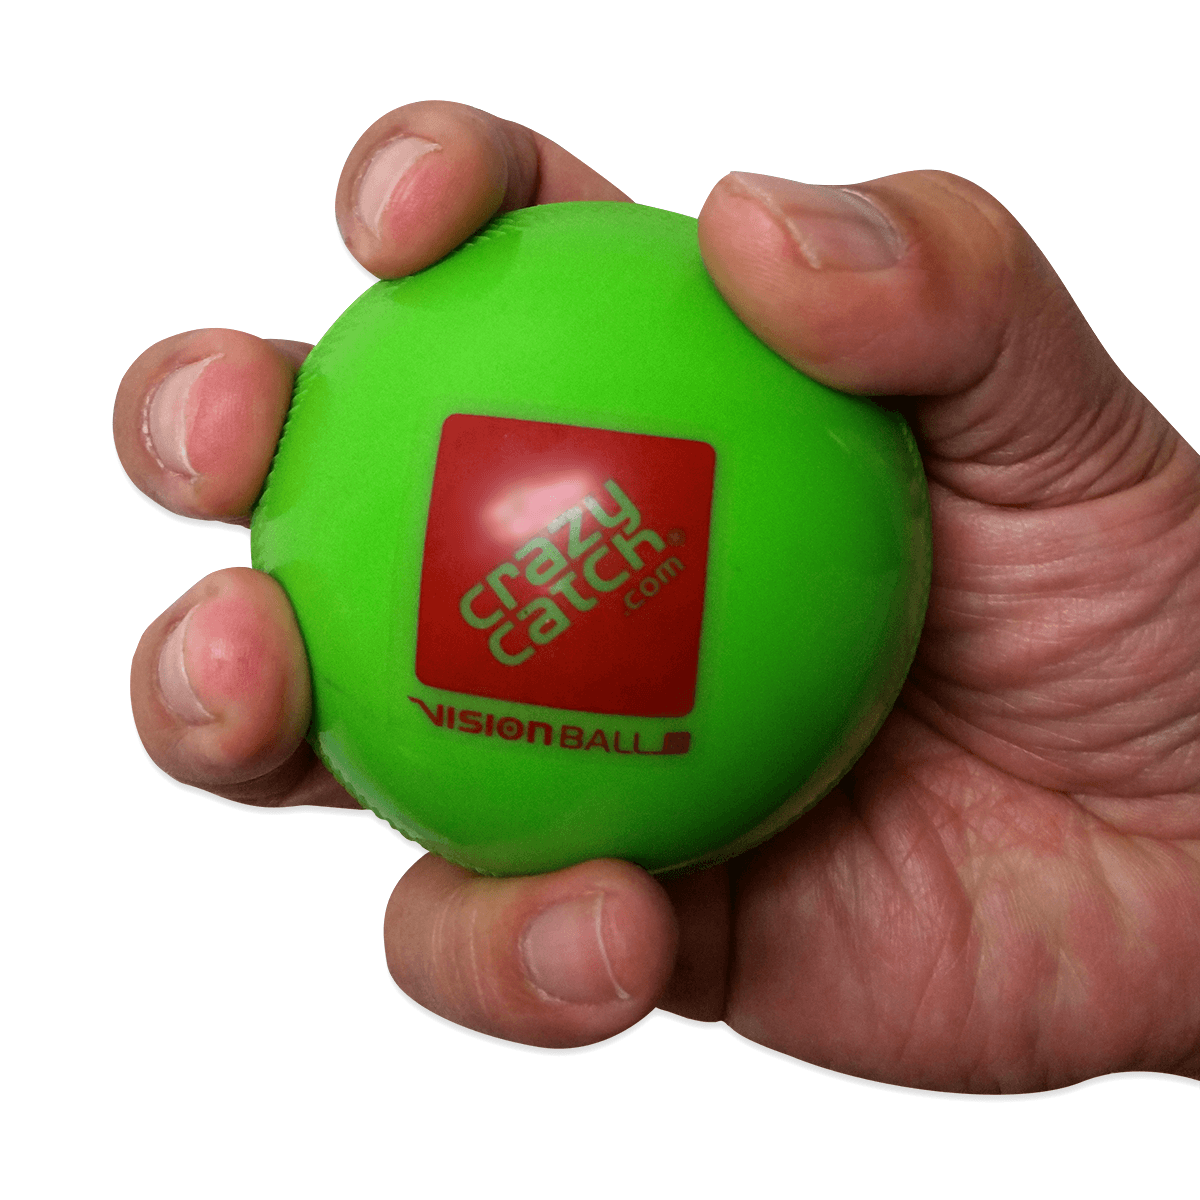 2 Hands -On Sphere Logo - Crazy Catch - Sports Training Ball, Level 2, Improves Agility for ...